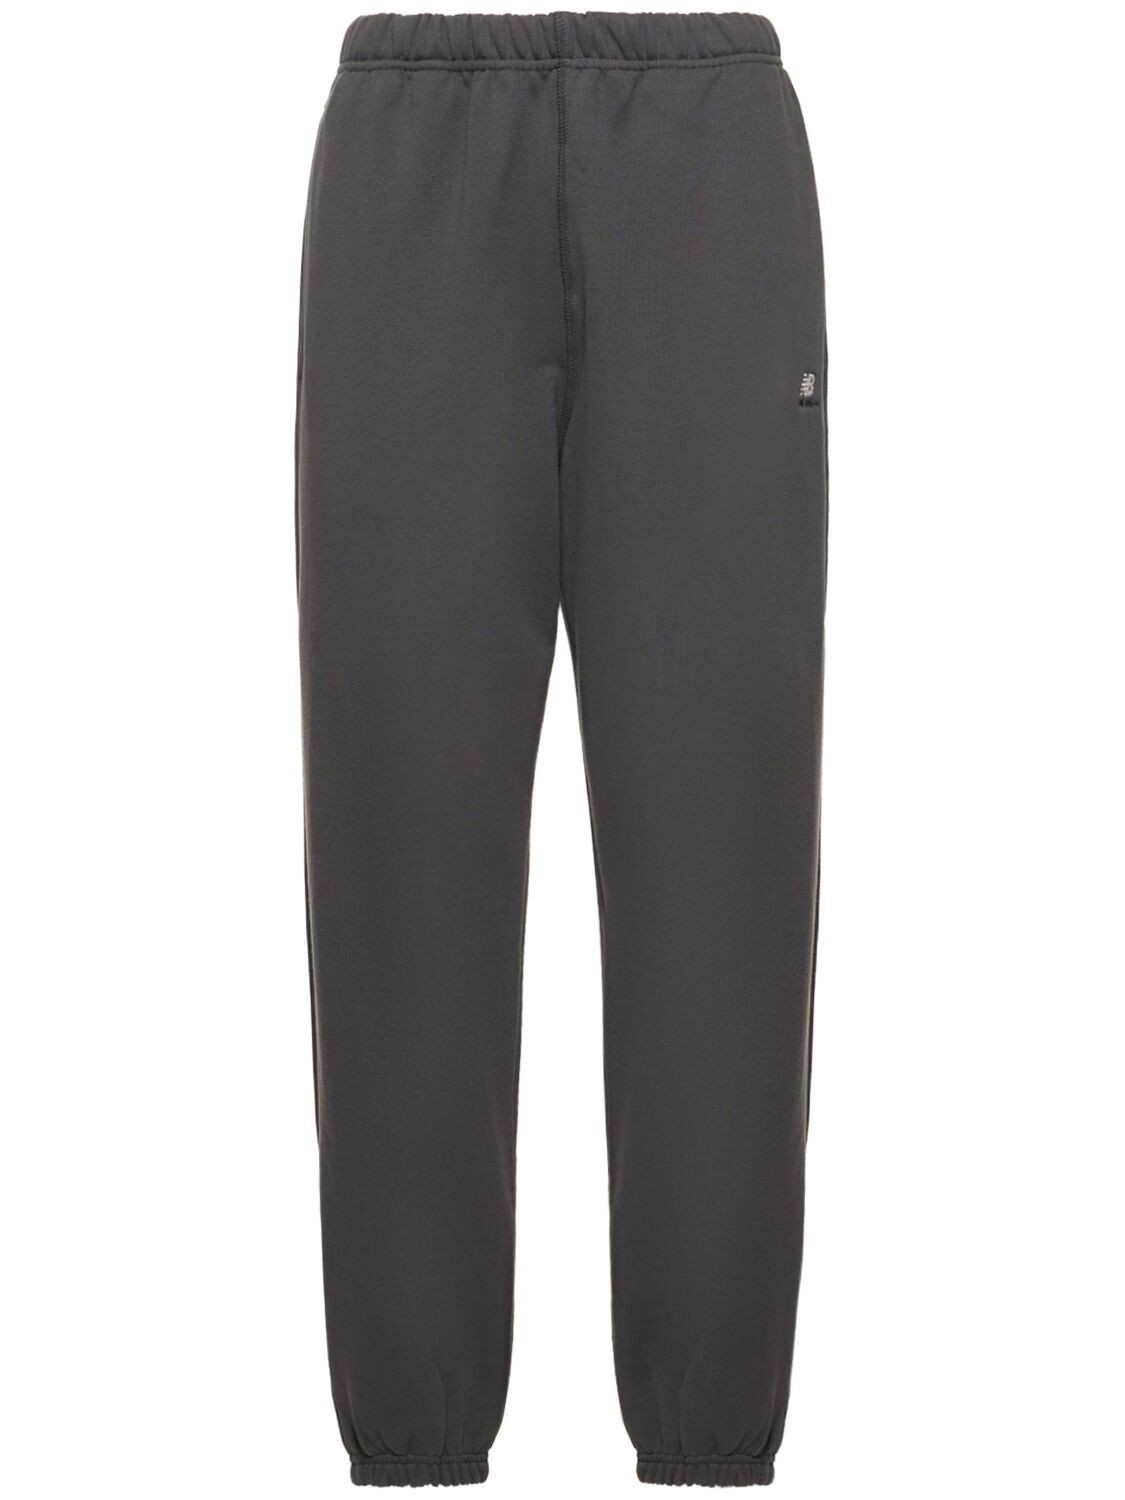 Image of Athletics Remastered French Terry Pants